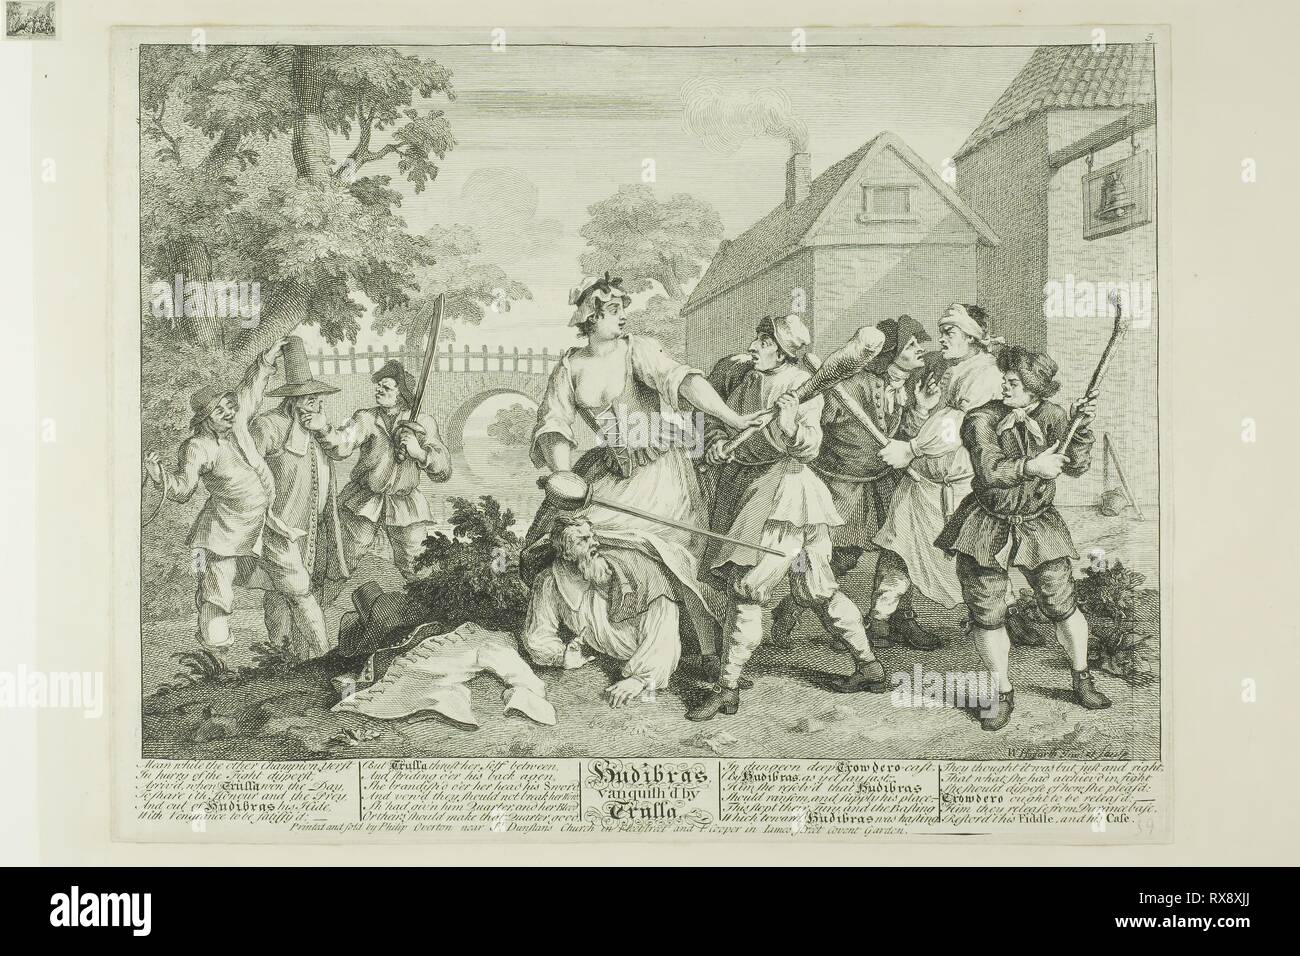 Hudibras Vanquished by Trulla, plate five from Hudibras. William Hogarth; English, 1697-1764. Date: 1725-1726. Dimensions: 235 × 335 mm (image); 266 × 346 mm (plate); 270 × 349 mm (primary support); 369 × 472 mm (secondary support). Etching and engraving in black on cream paper edge mounted on cream wove paper. Origin: England. Museum: The Chicago Art Institute. Stock Photo